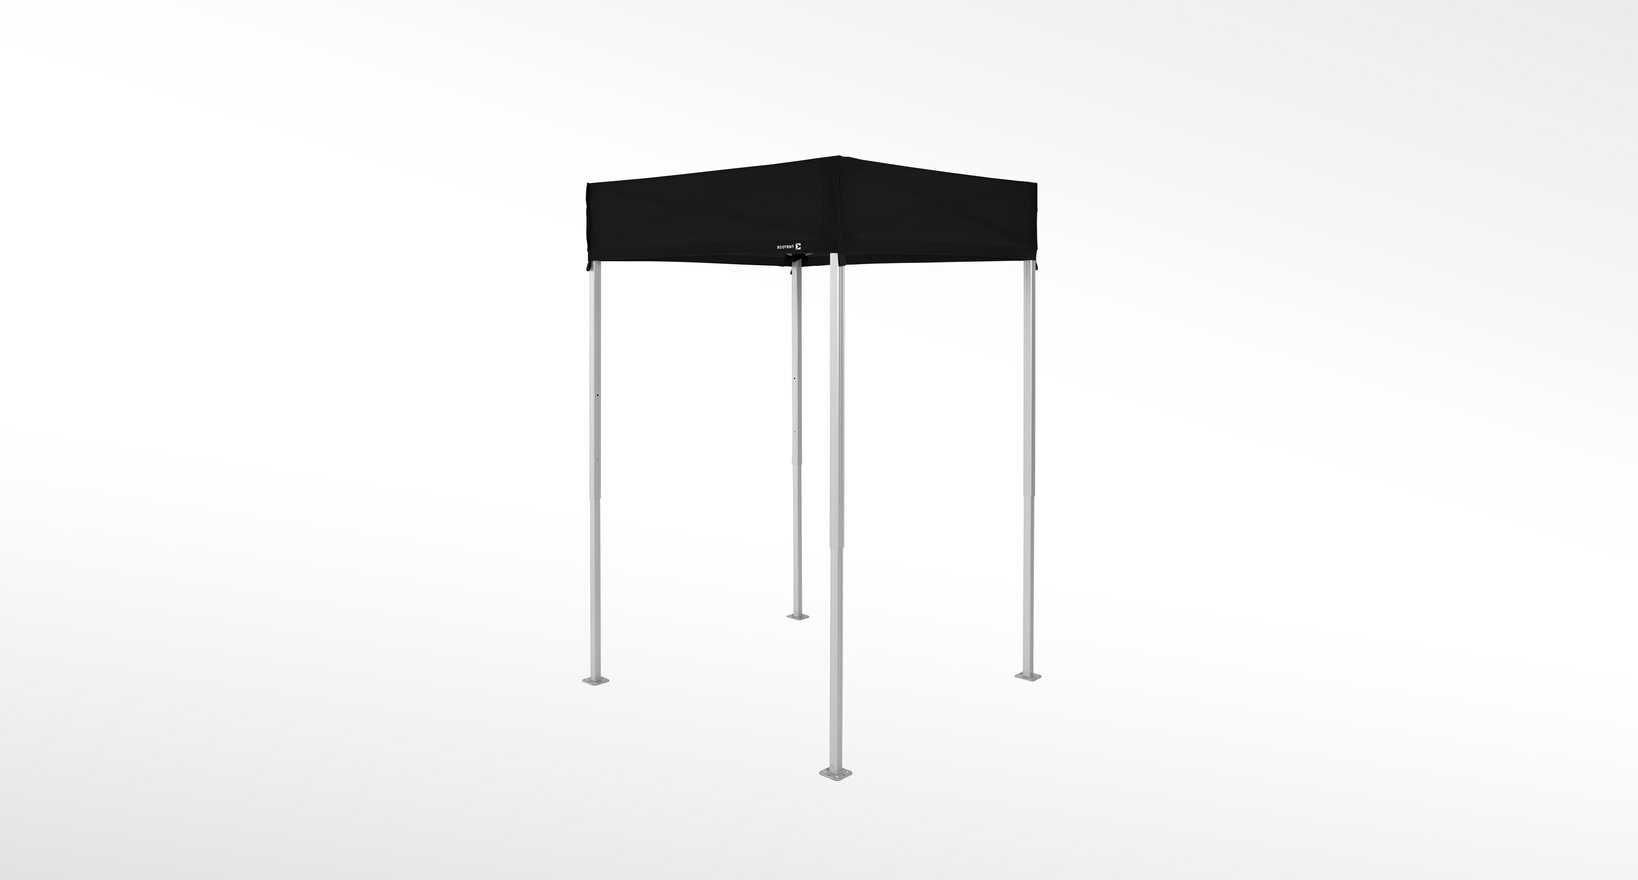 An Ecotent 5x5ft canopy tent with a black roof on a white background.